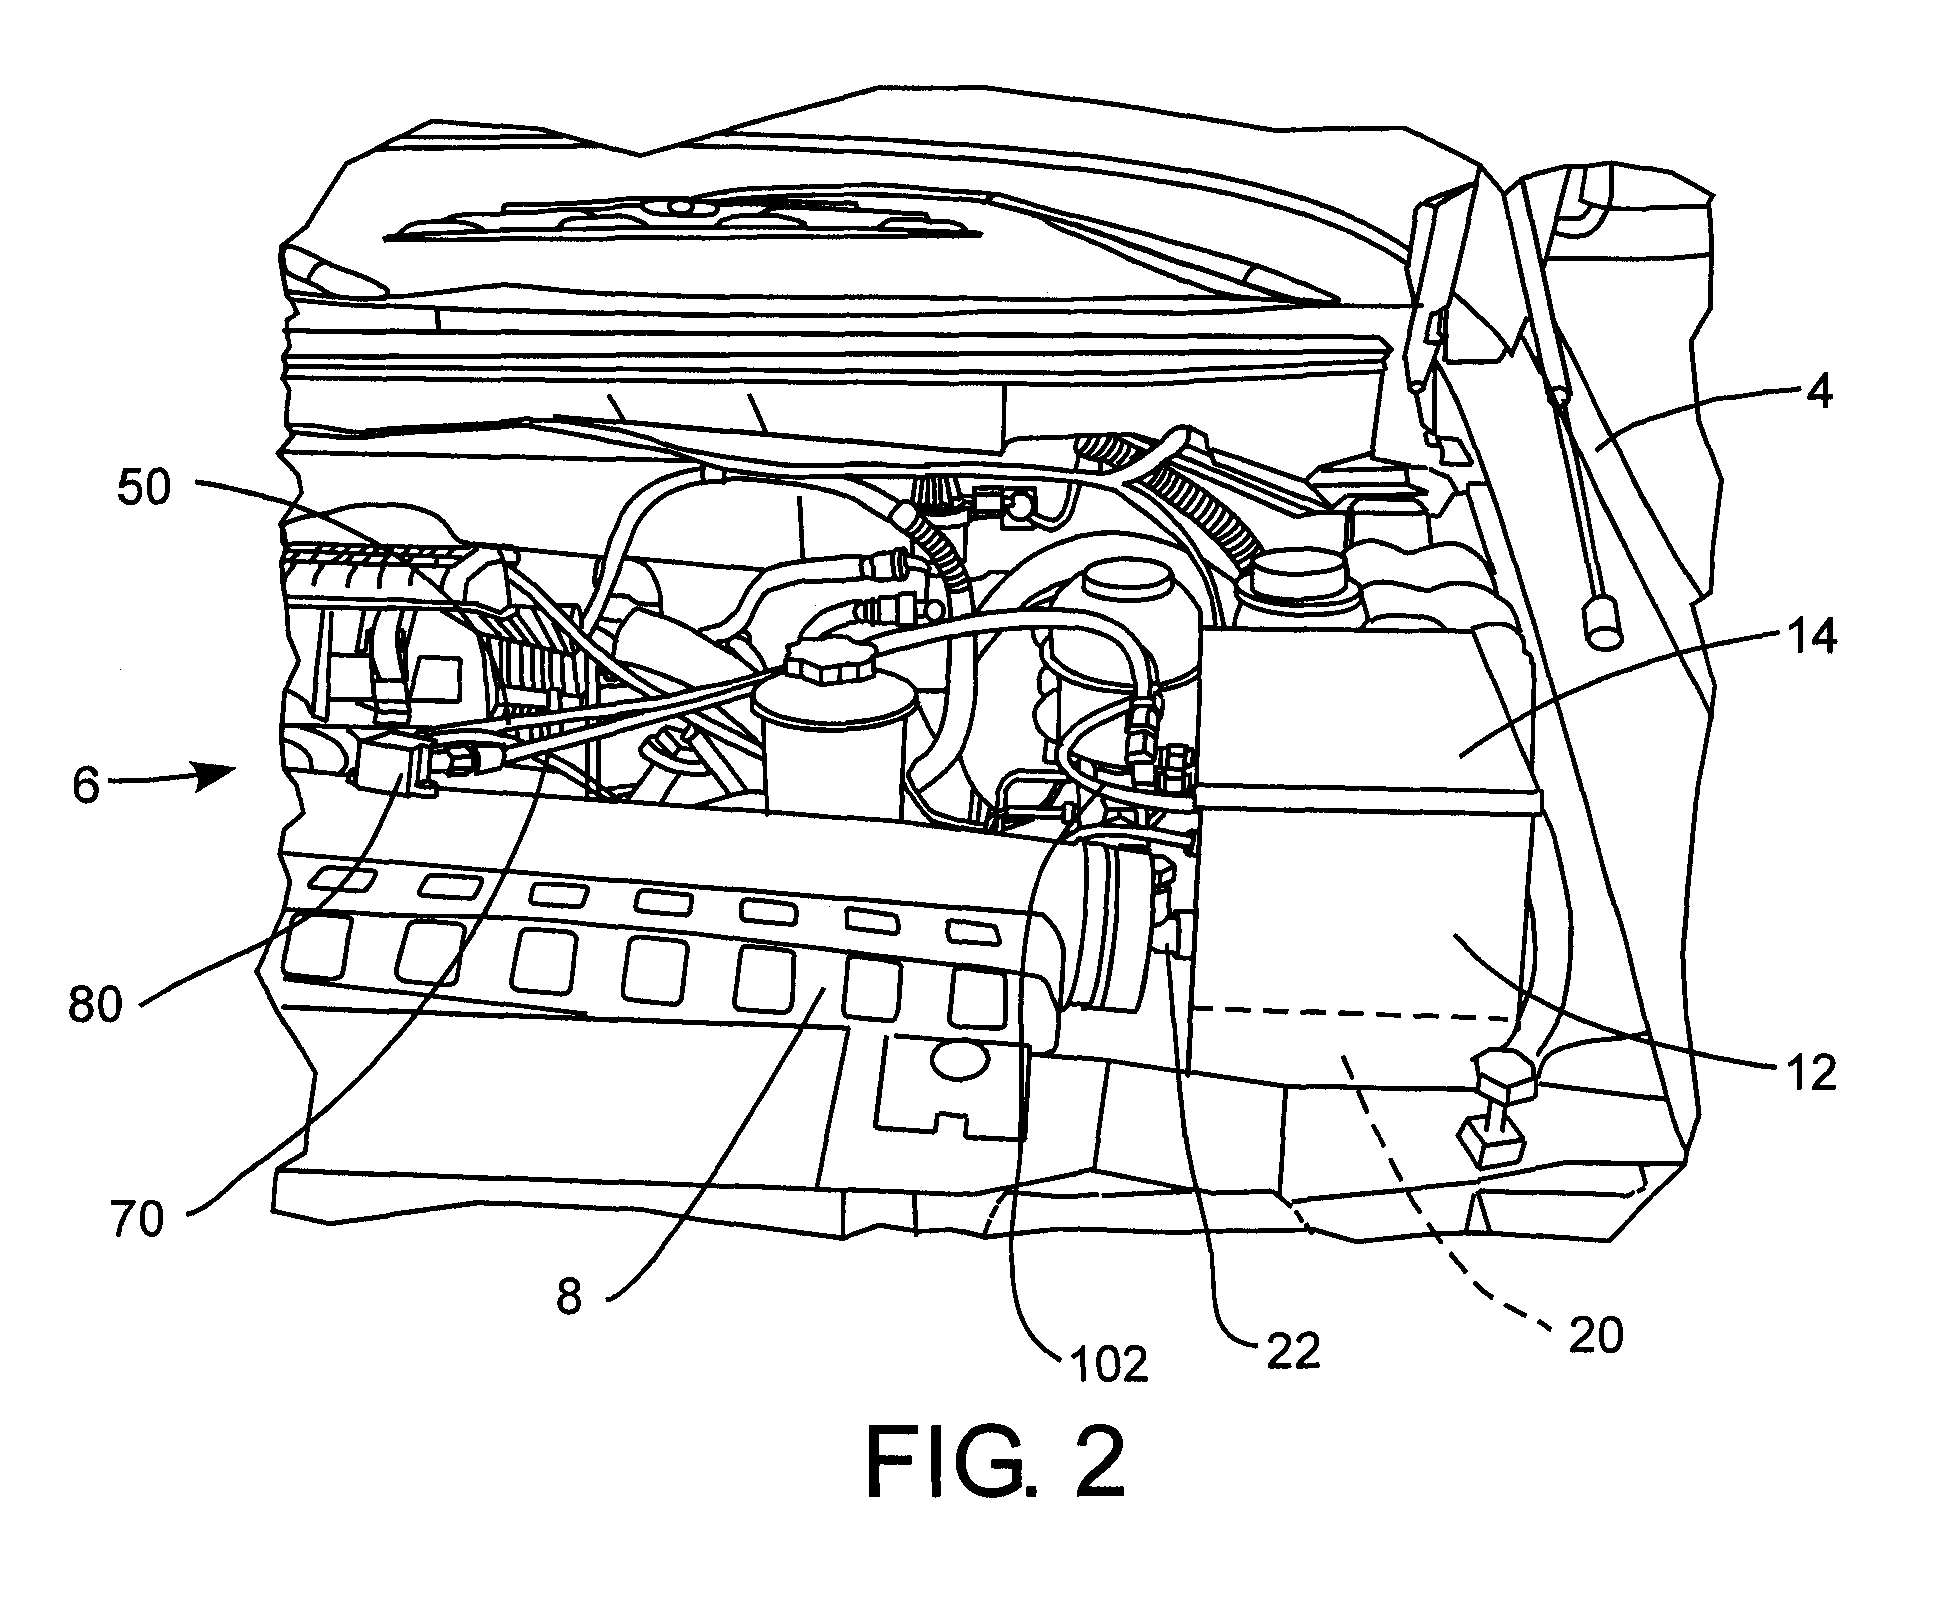 Hydrogen fuel assist device for an internal combustion engine and method